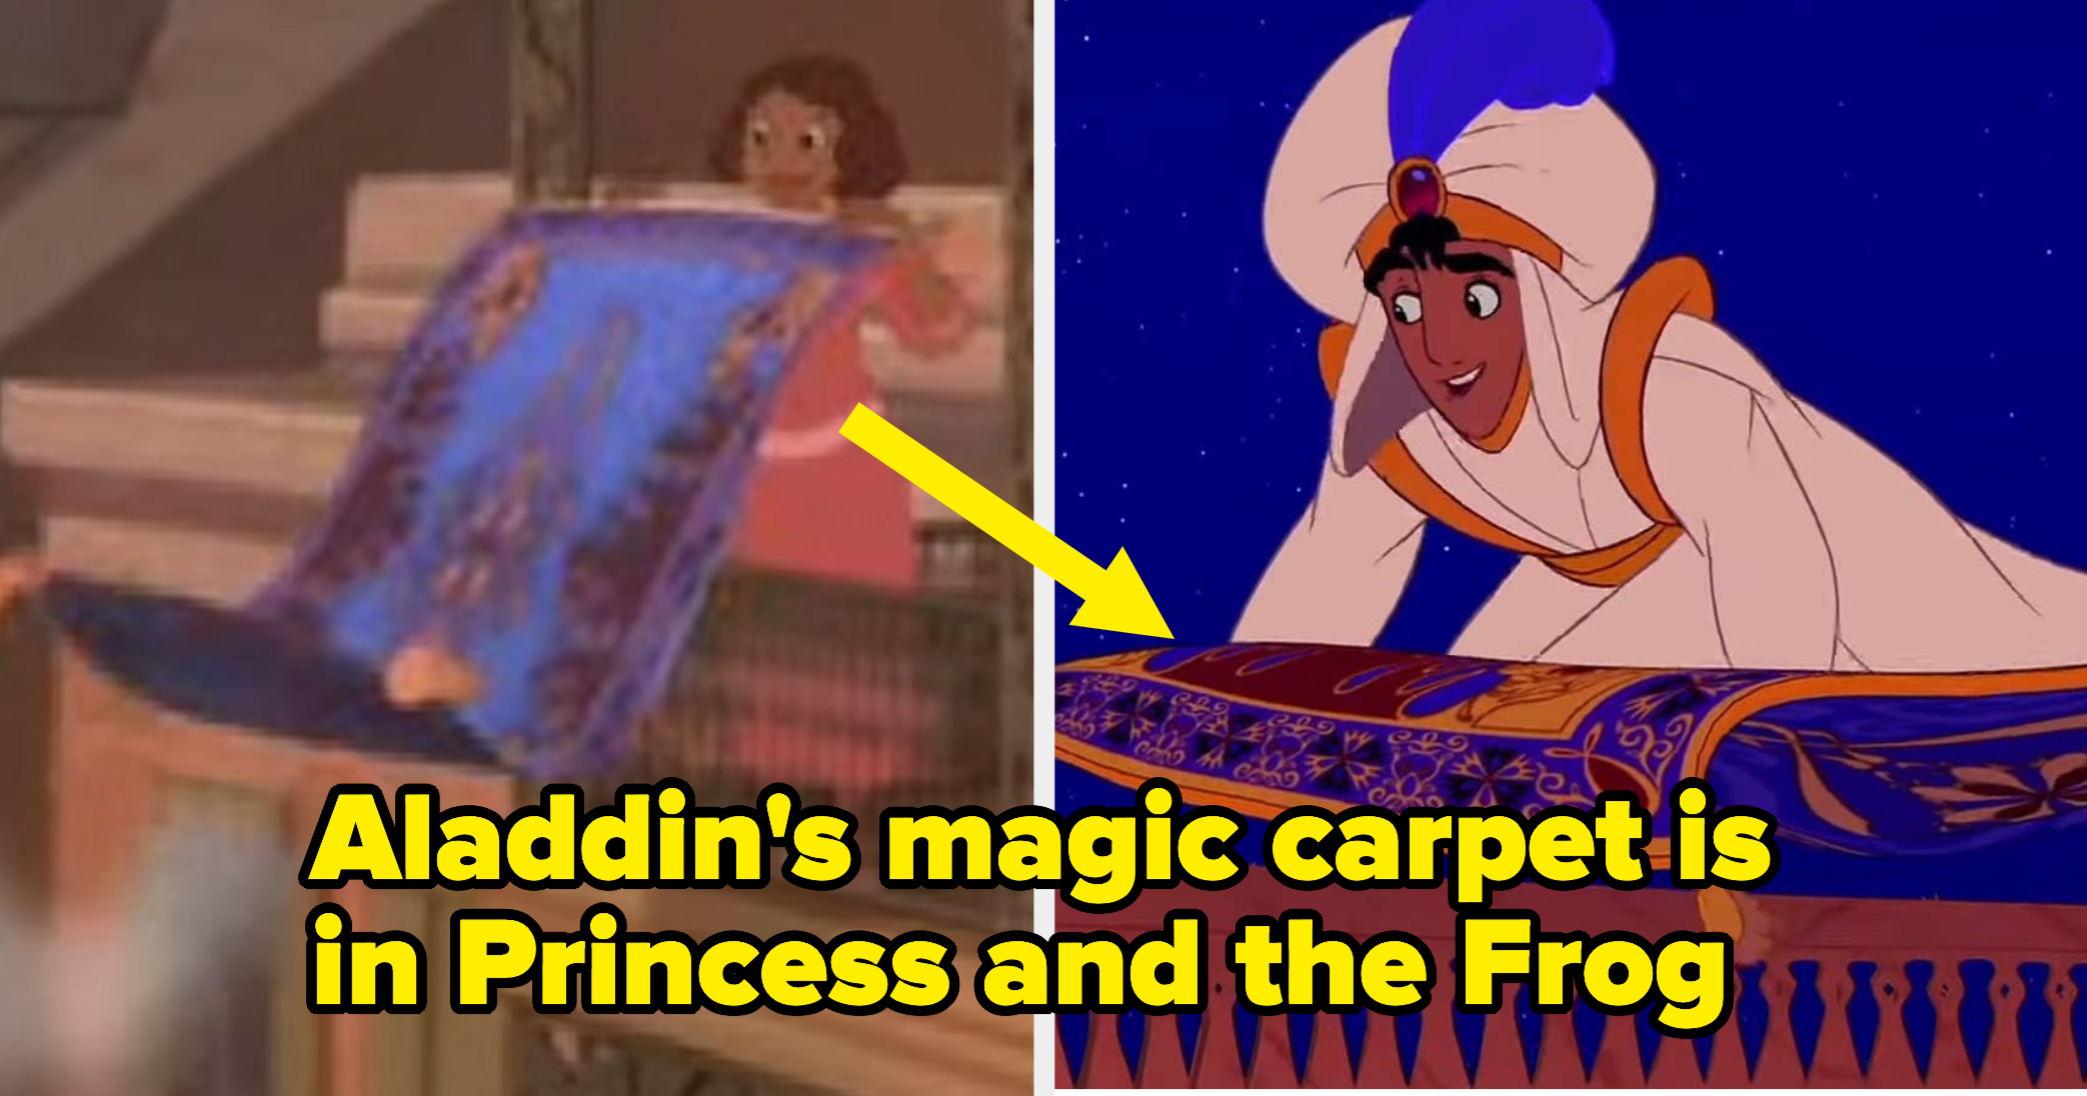 Disney Having Hardcore Sex - 20 Disney Easter Eggs You Missed The First Time